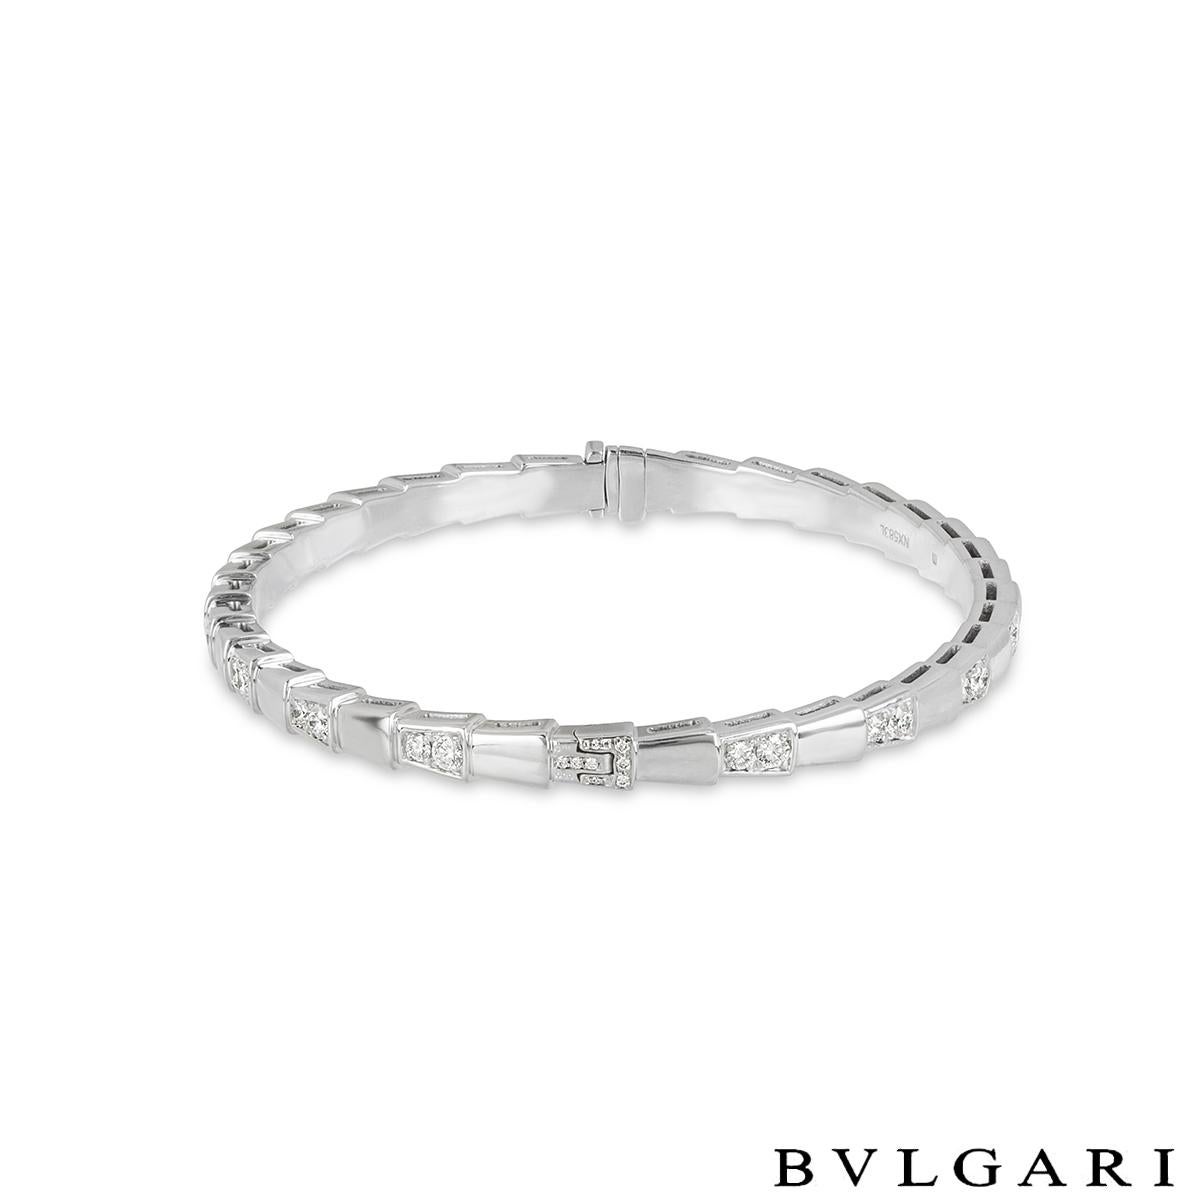 A stunning 18k white gold diamond bracelet by Bvlgari from the Serpenti collection. The bracelet is in the form of a serpent and beautifully alternates between high polish and diamond sections that evoke the viper's spiral move before it strikes.